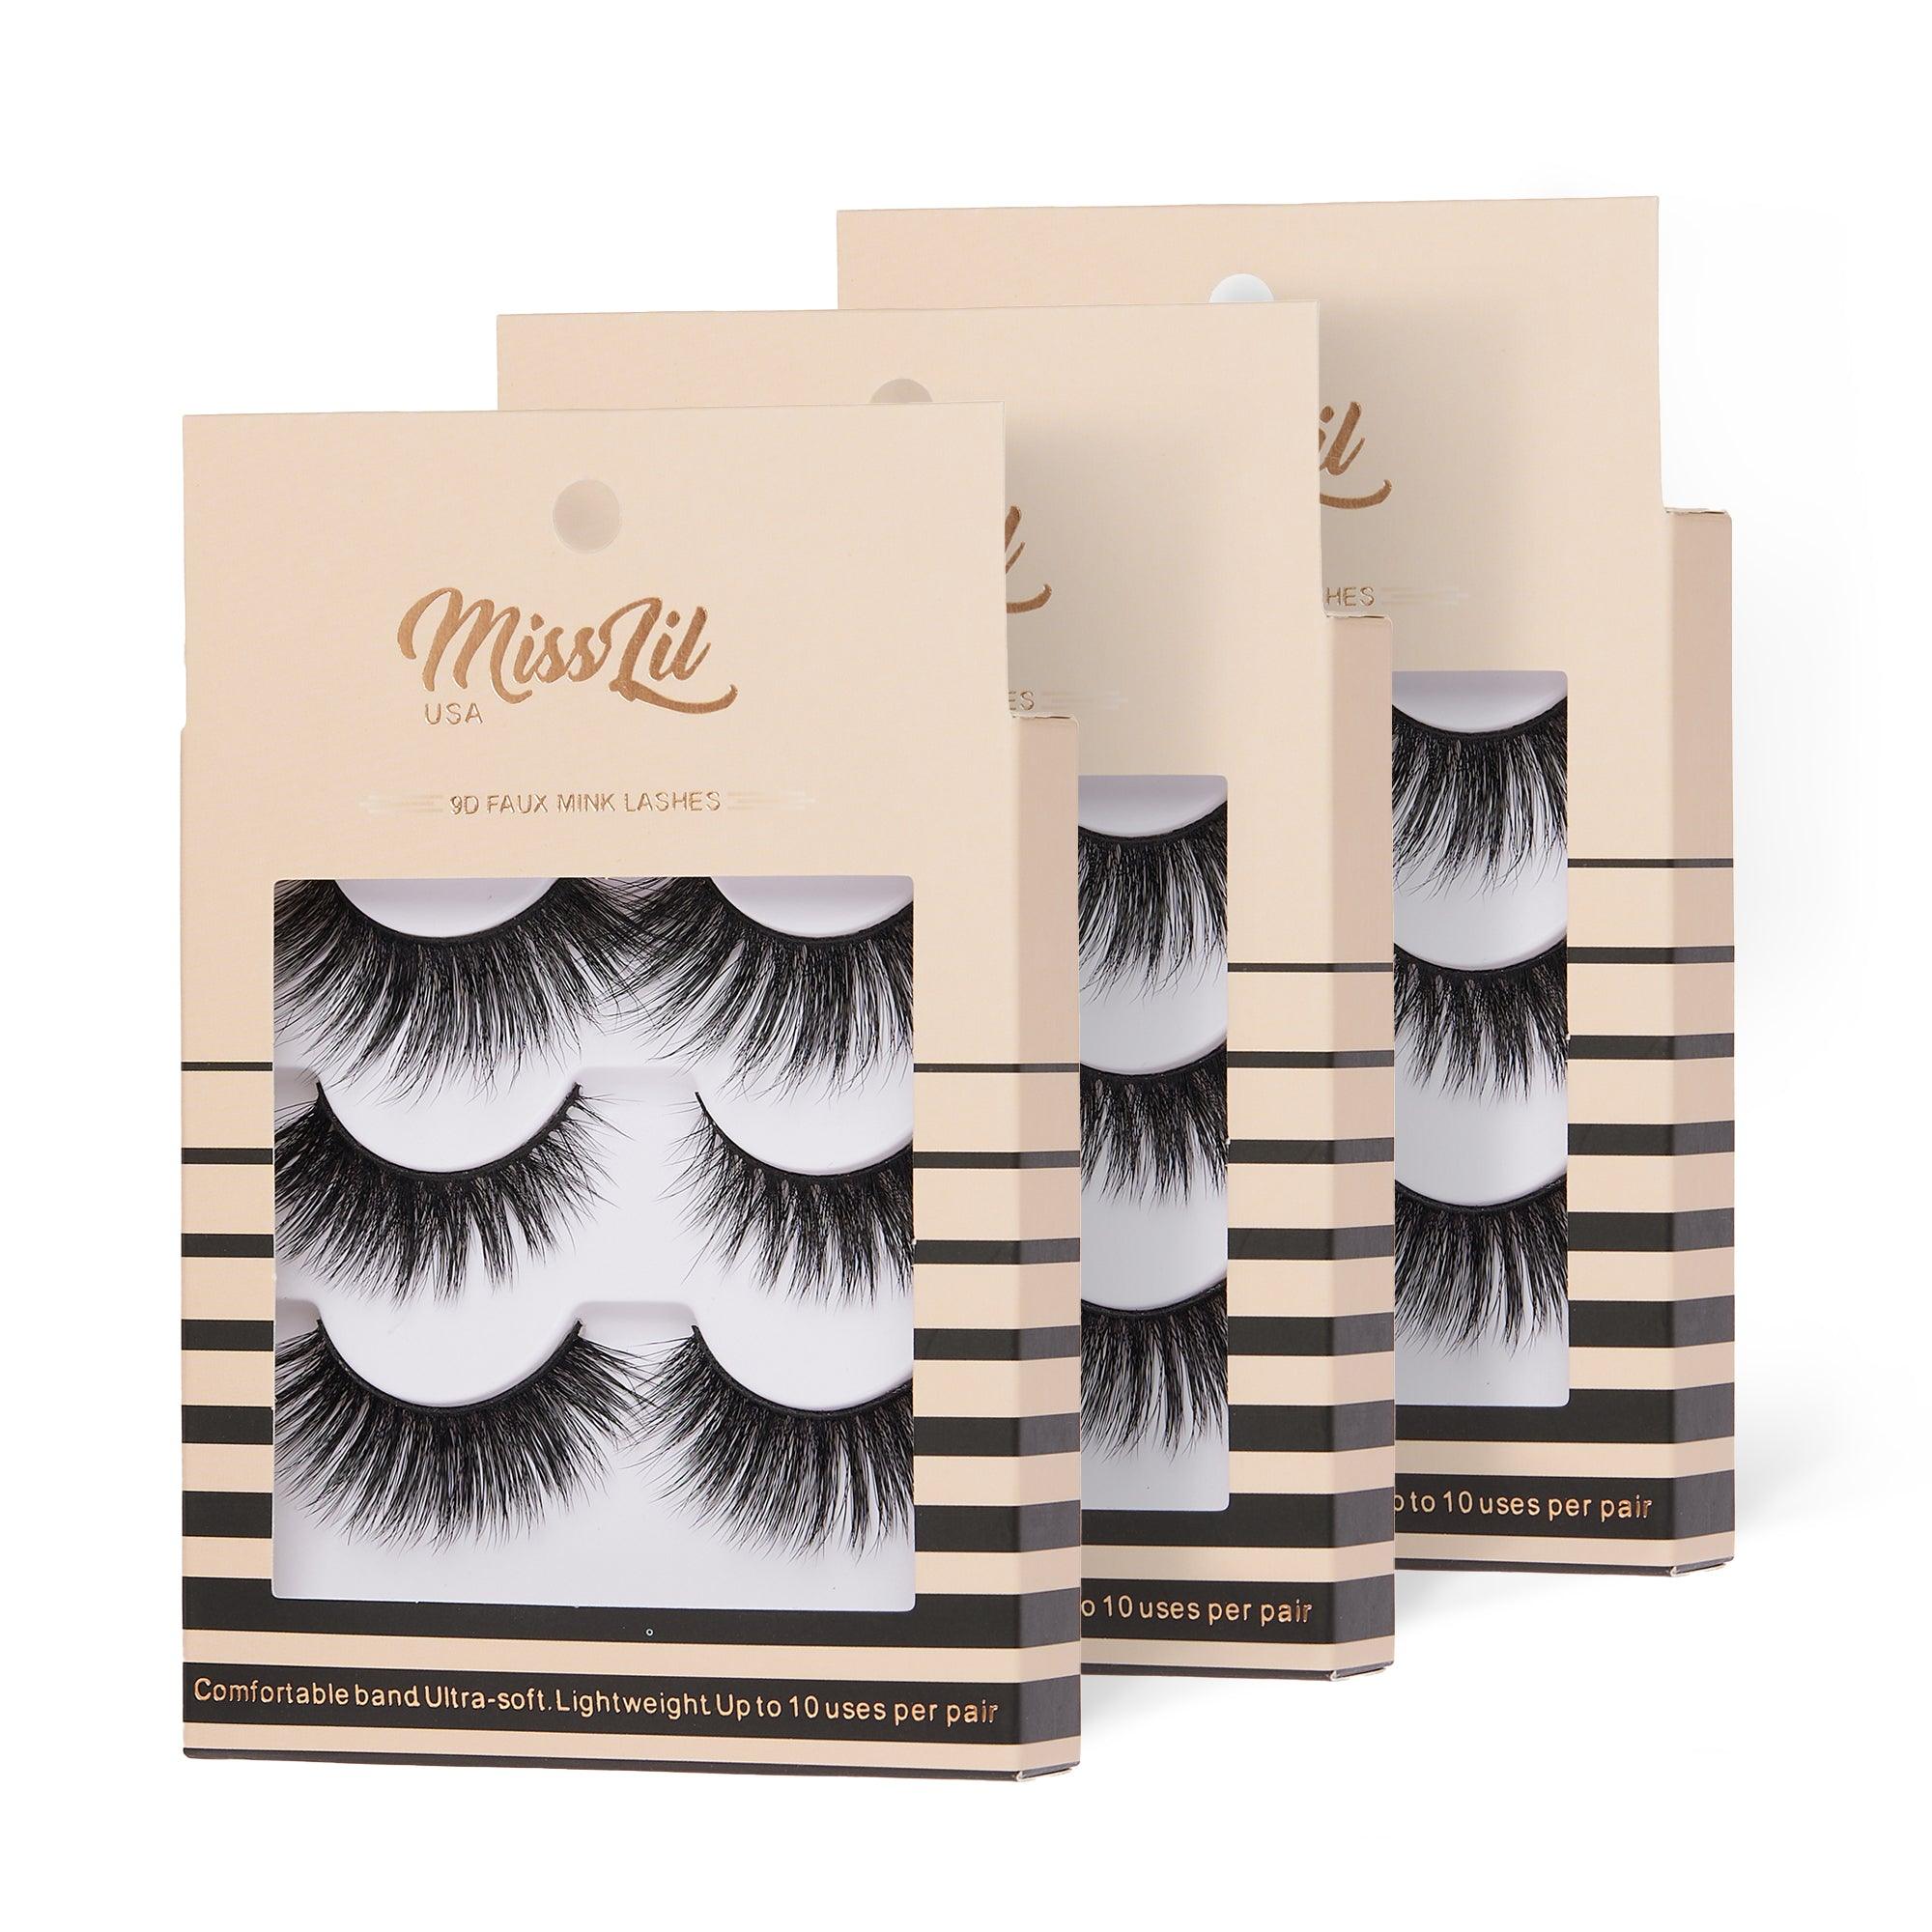 3-Pair Faux 9D Mink Eyelashes - Luxury Collection #17 - Pack of 3 - Miss Lil USA